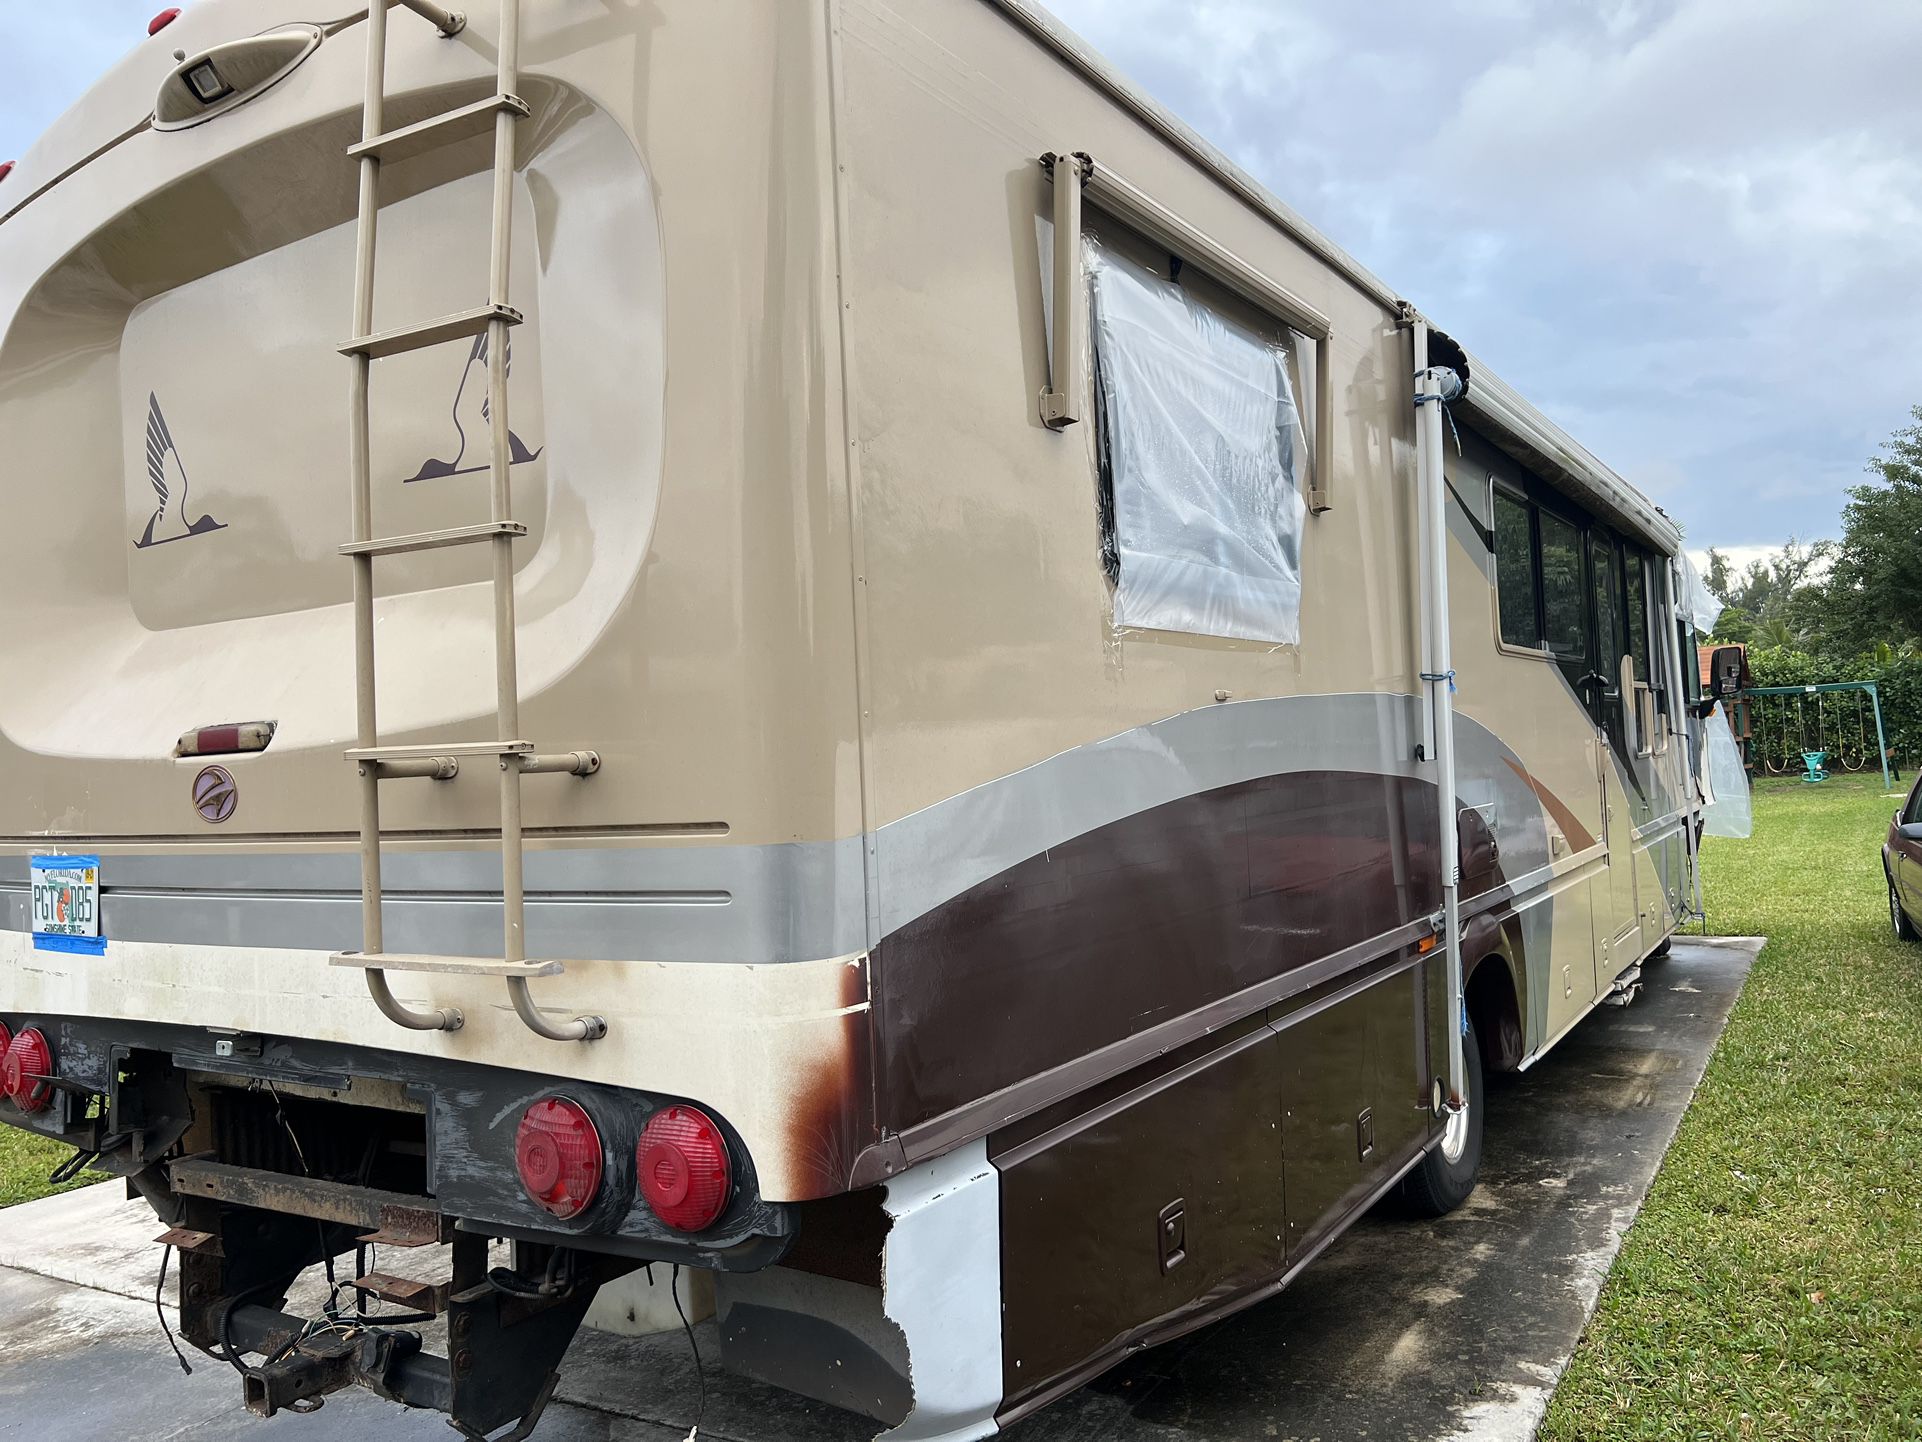 Ford P30 1997 Motor home RV, Salvage Title 